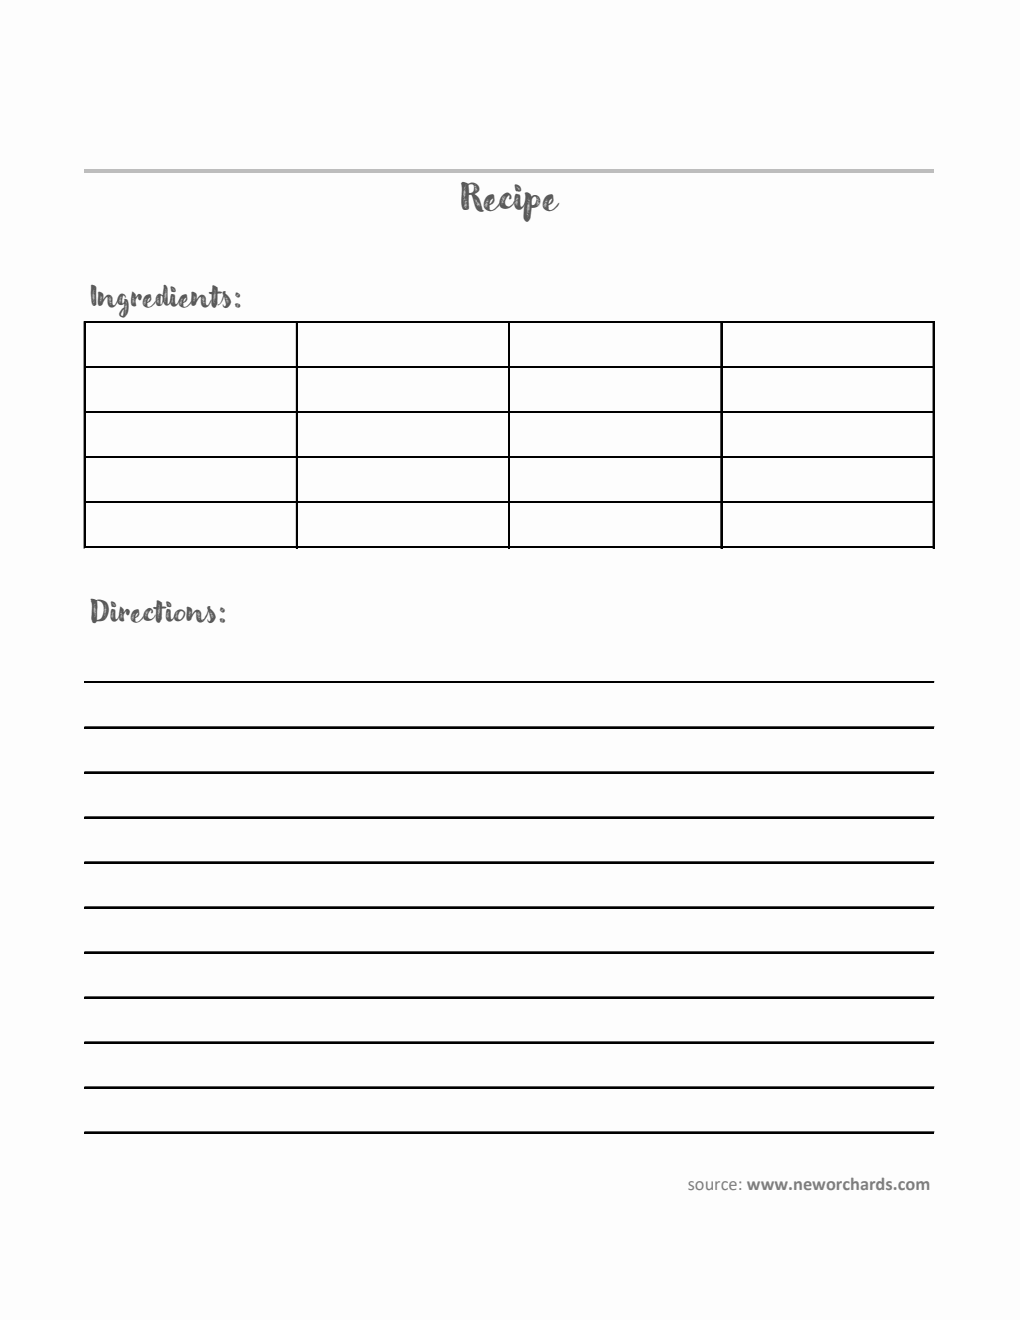 Printable Recipe Card Template - Excel (Basic)